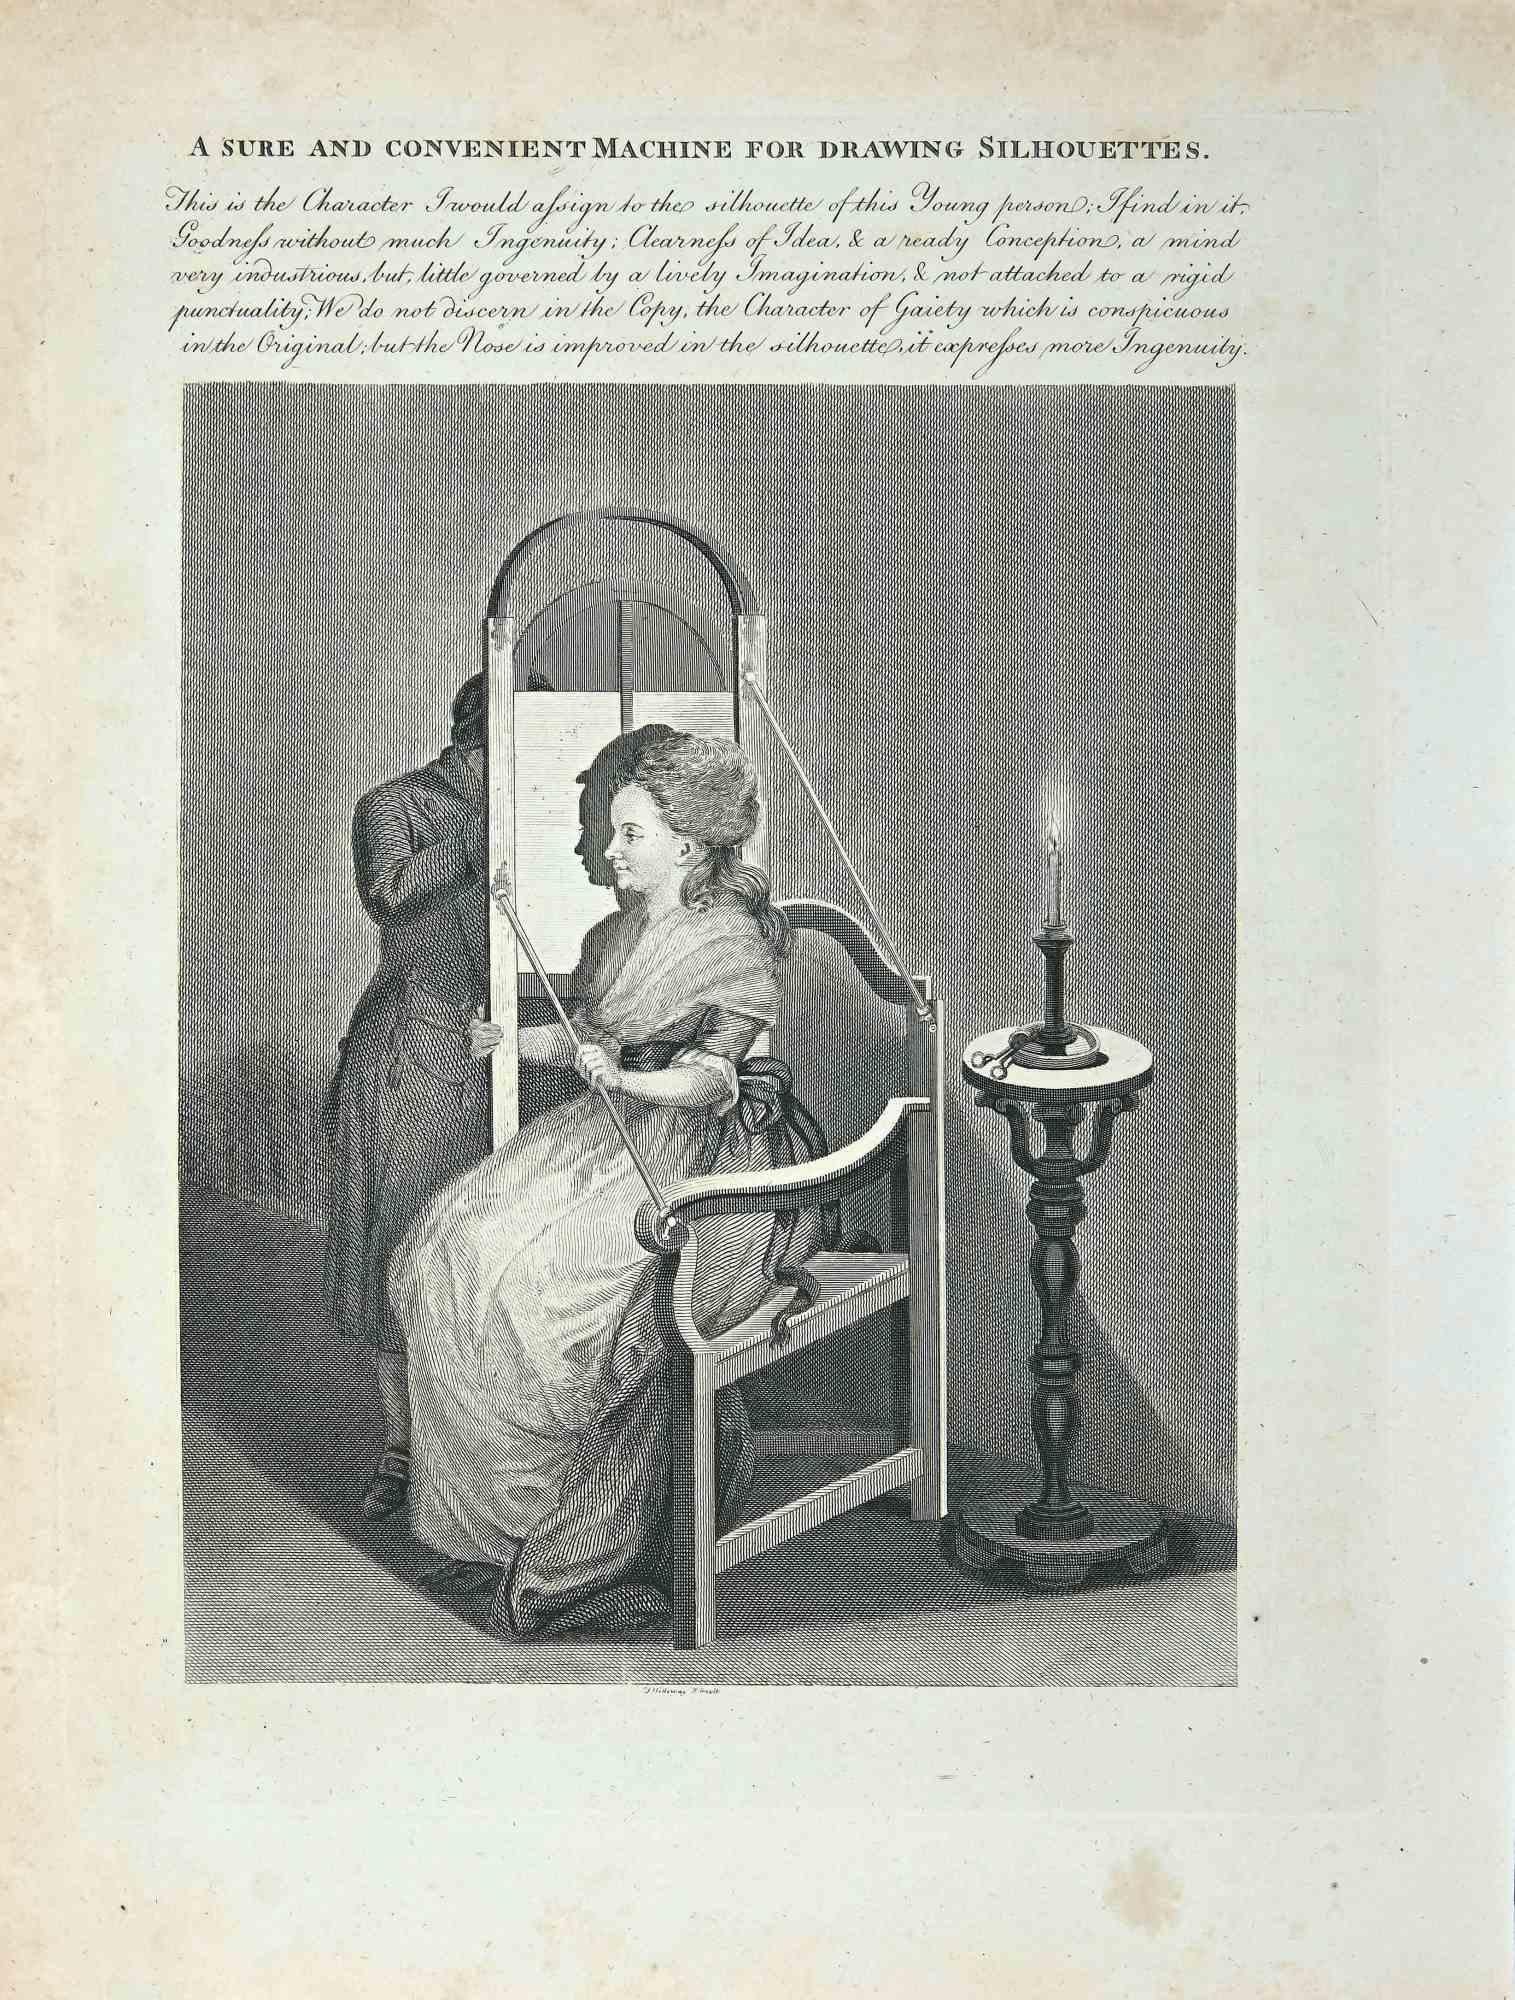 Portrait of Woman  is an original artwork realized by Thomas Holloway (1748 - 1827).

Original Etching from J.C. Lavater's "Essays on Physiognomy, Designed to promote the Knowledge and the Love of Mankind", London, Bensley, 1810. 

A the bottom